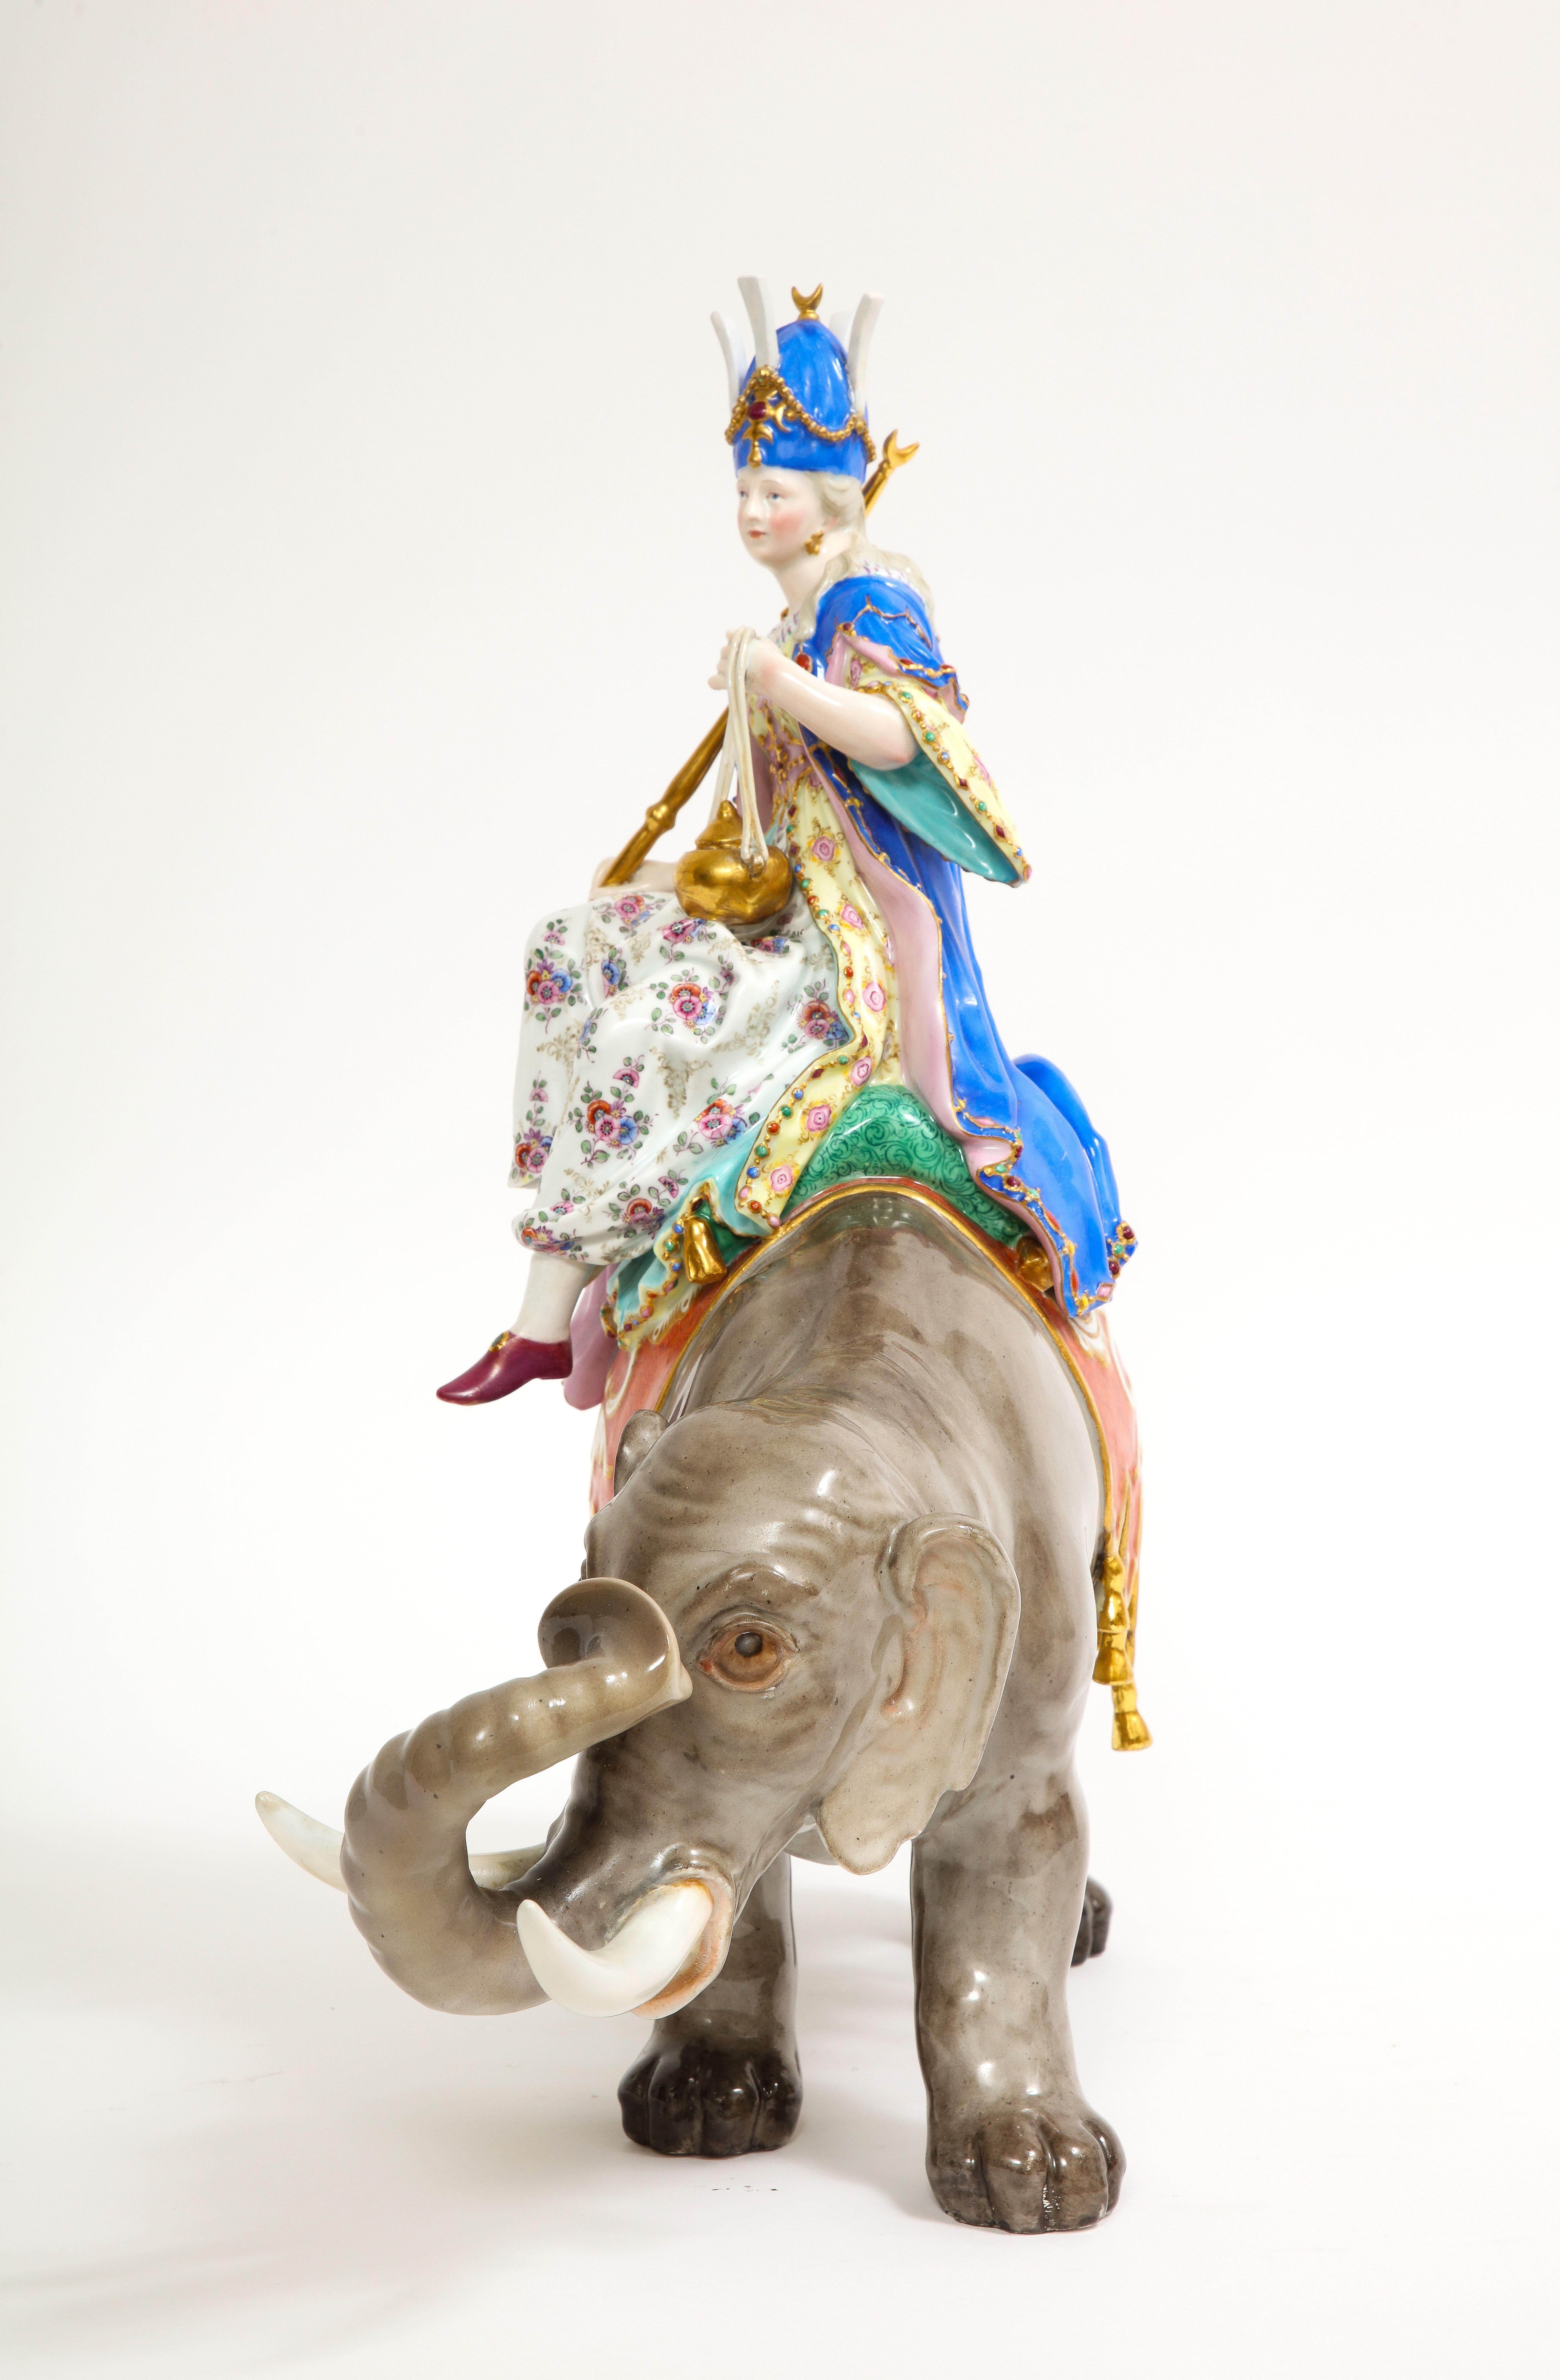 19th C. Meissen Porcelain Figure of a Sultana Riding an Elephant with a Crown In Good Condition For Sale In New York, NY